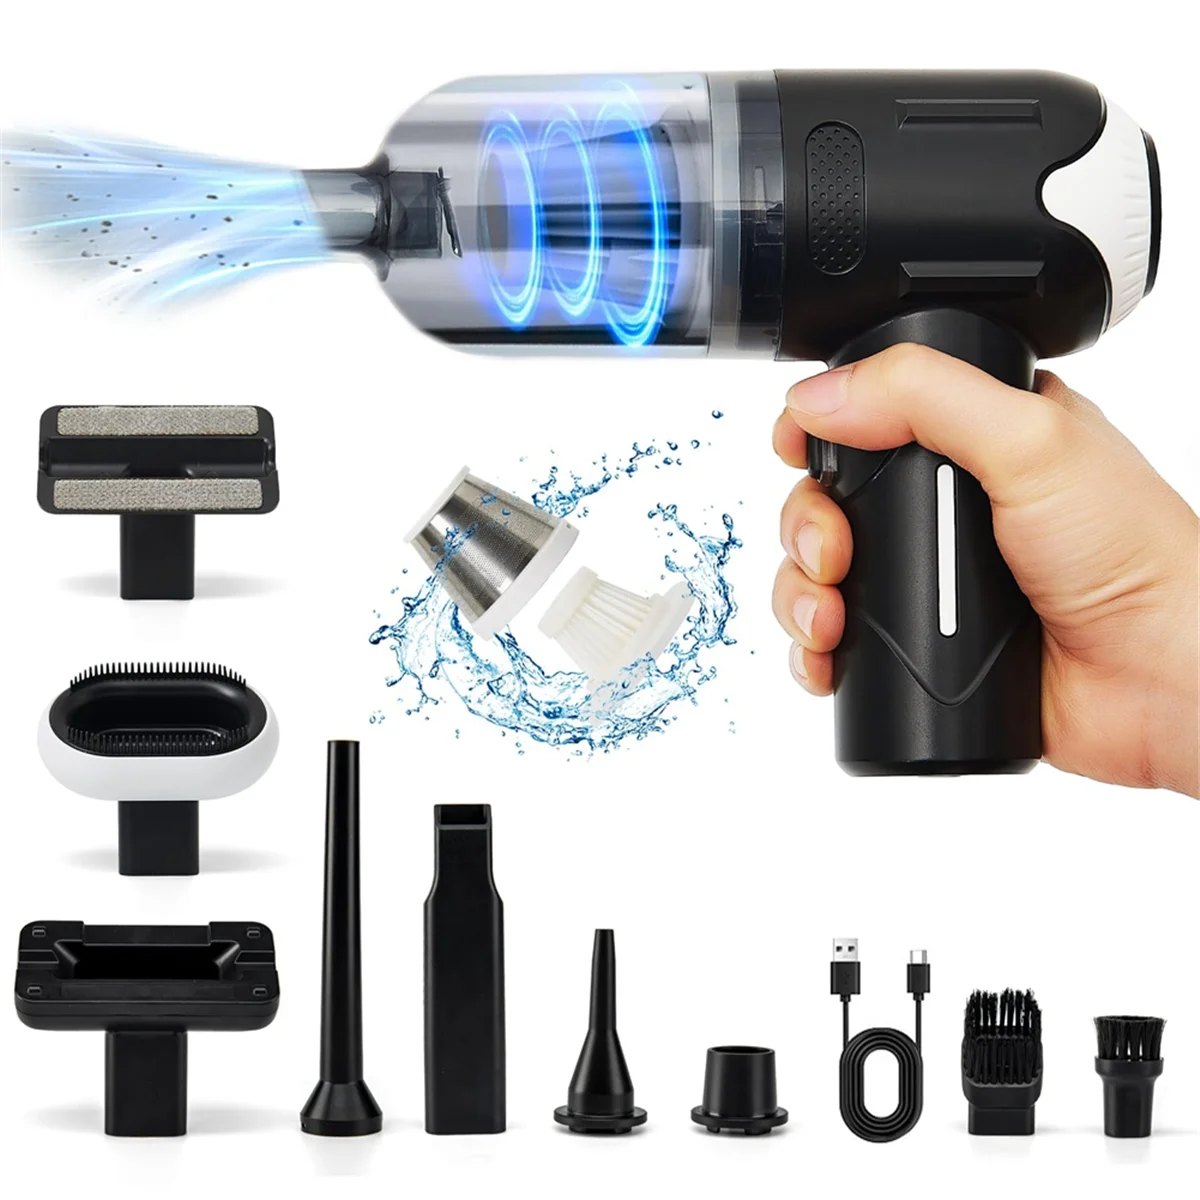 

Handheld Vacuums Cleaner Car Vacuum Cordless Powerful,12000Pa Super Suction, Hand Cleaners Brushless Vacuums,Dust Buster